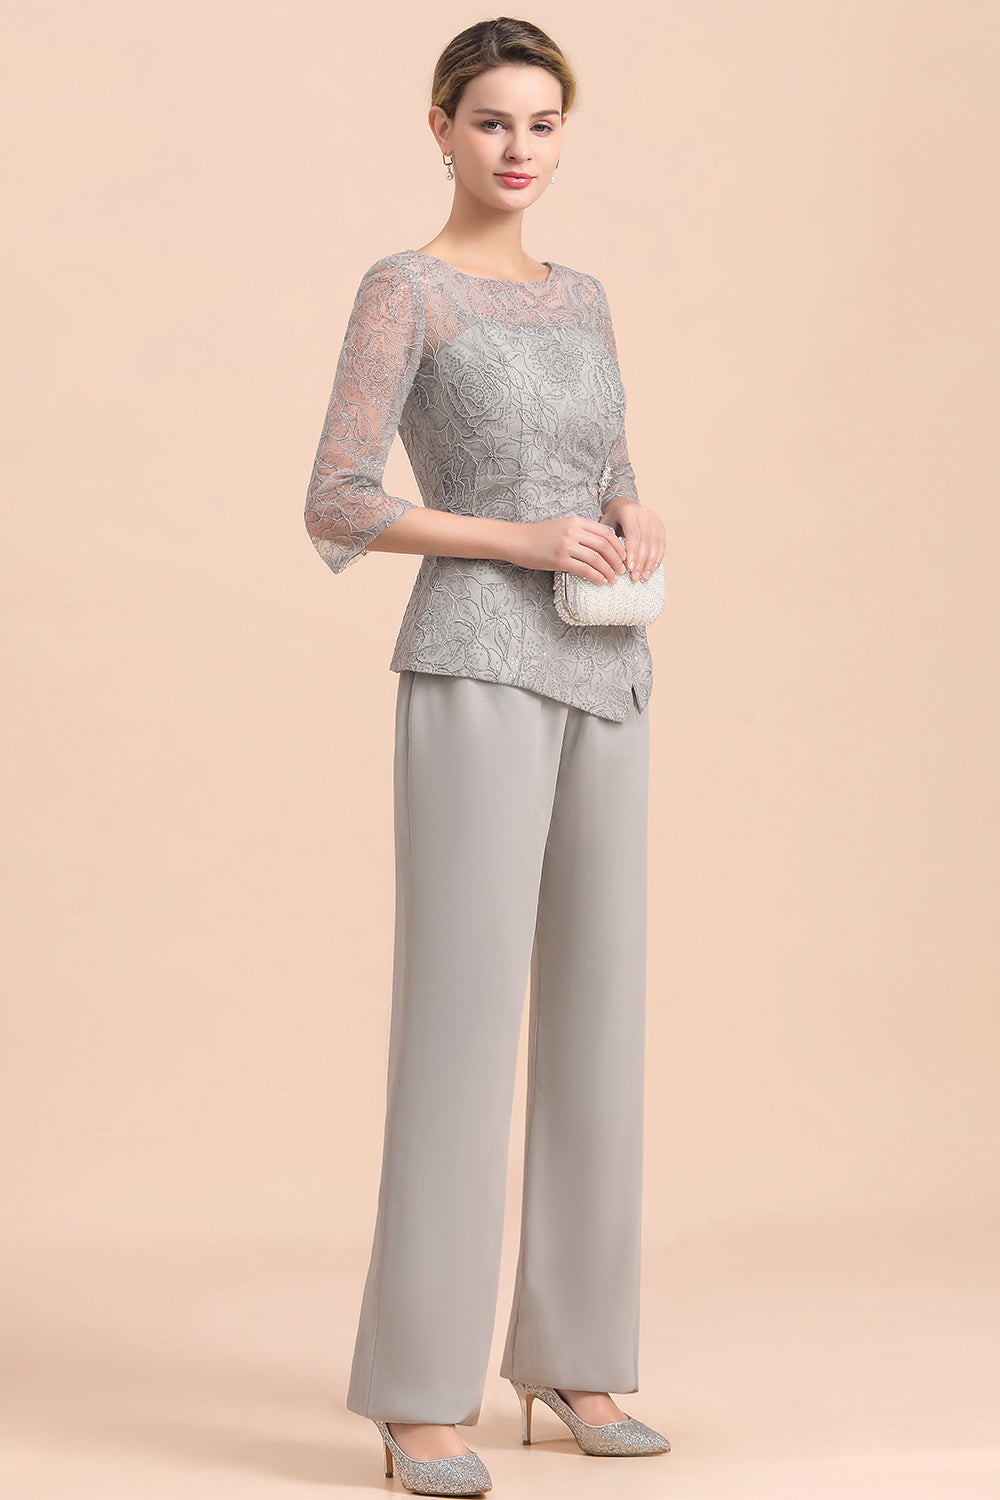 Elegant 3/4 Sleeves Lace Chiffon Affordable Mother of Bride Jumpsuit Online